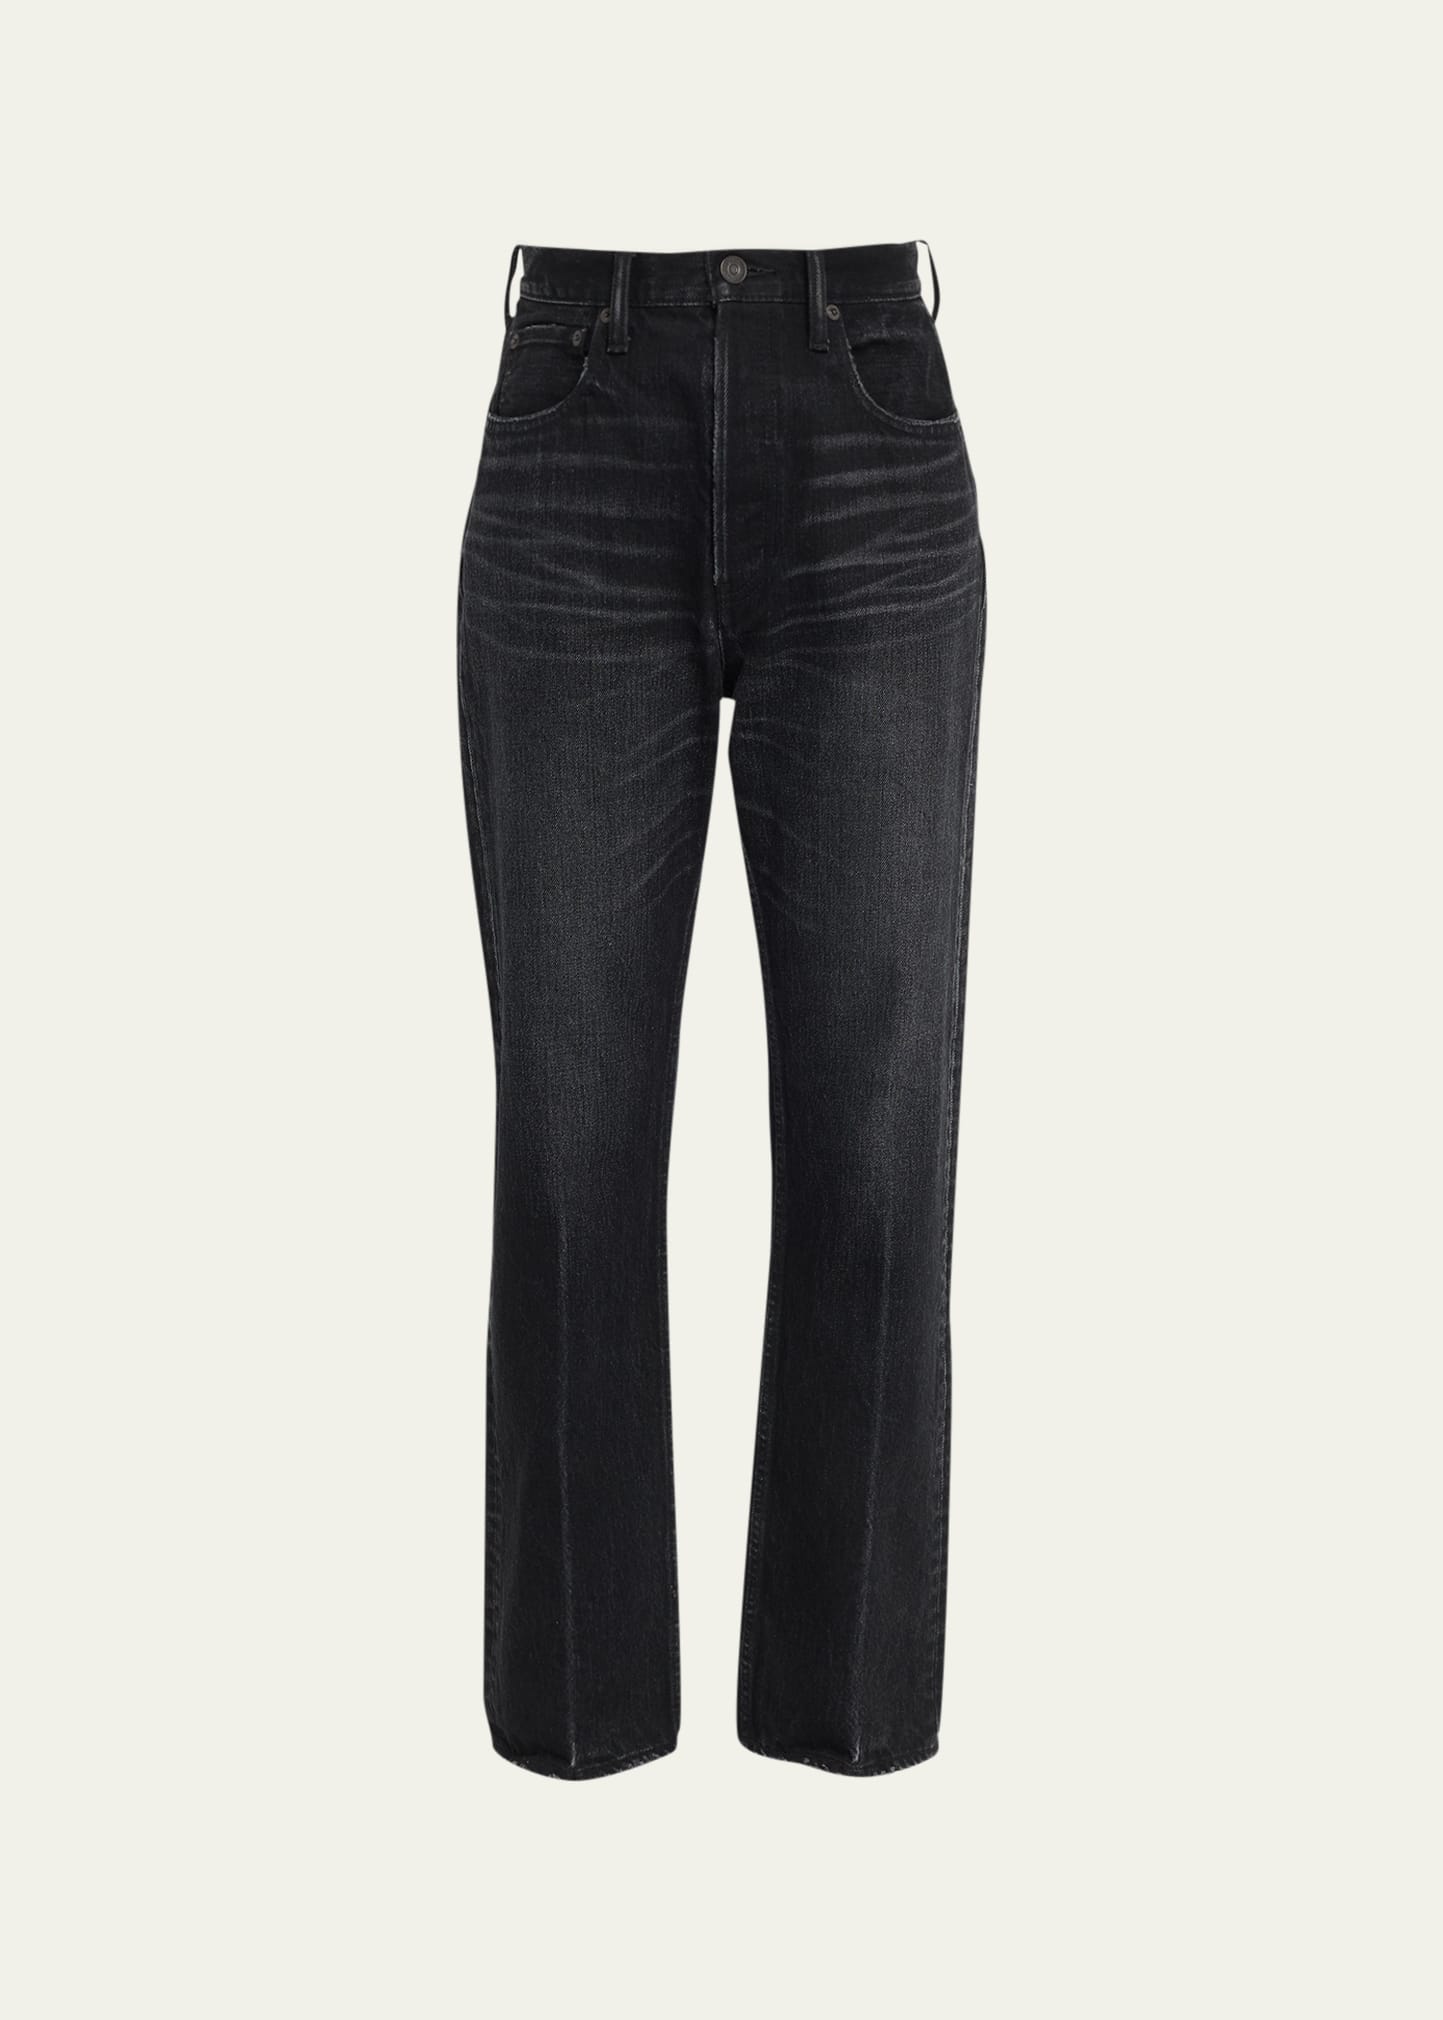 MOUSSY VINTAGE MURRIETA WIDE STRAIGHT JEANS